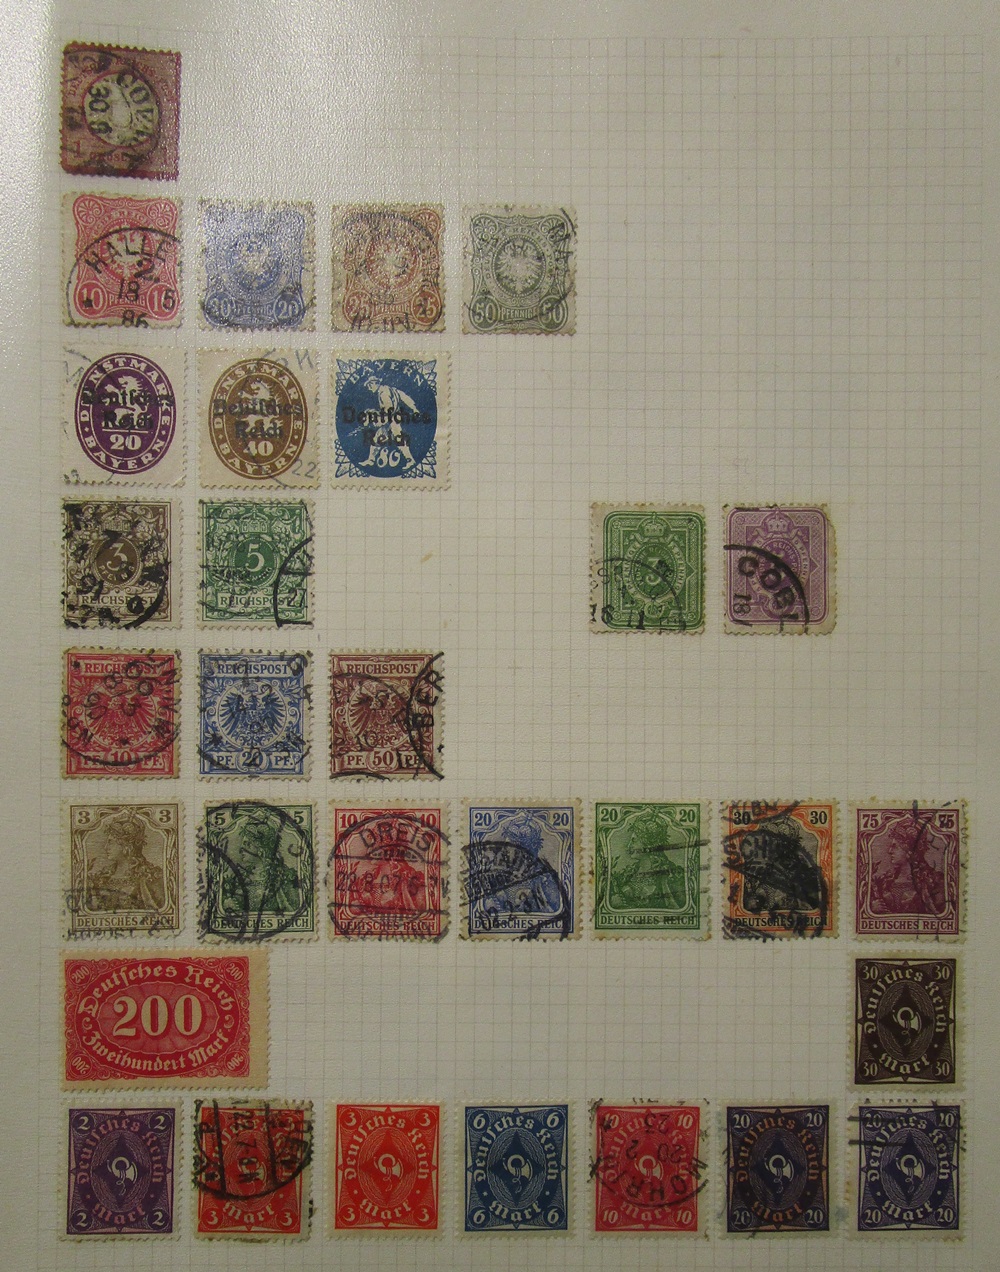 Stamps - German album pages and covers in folder, late 19C onward